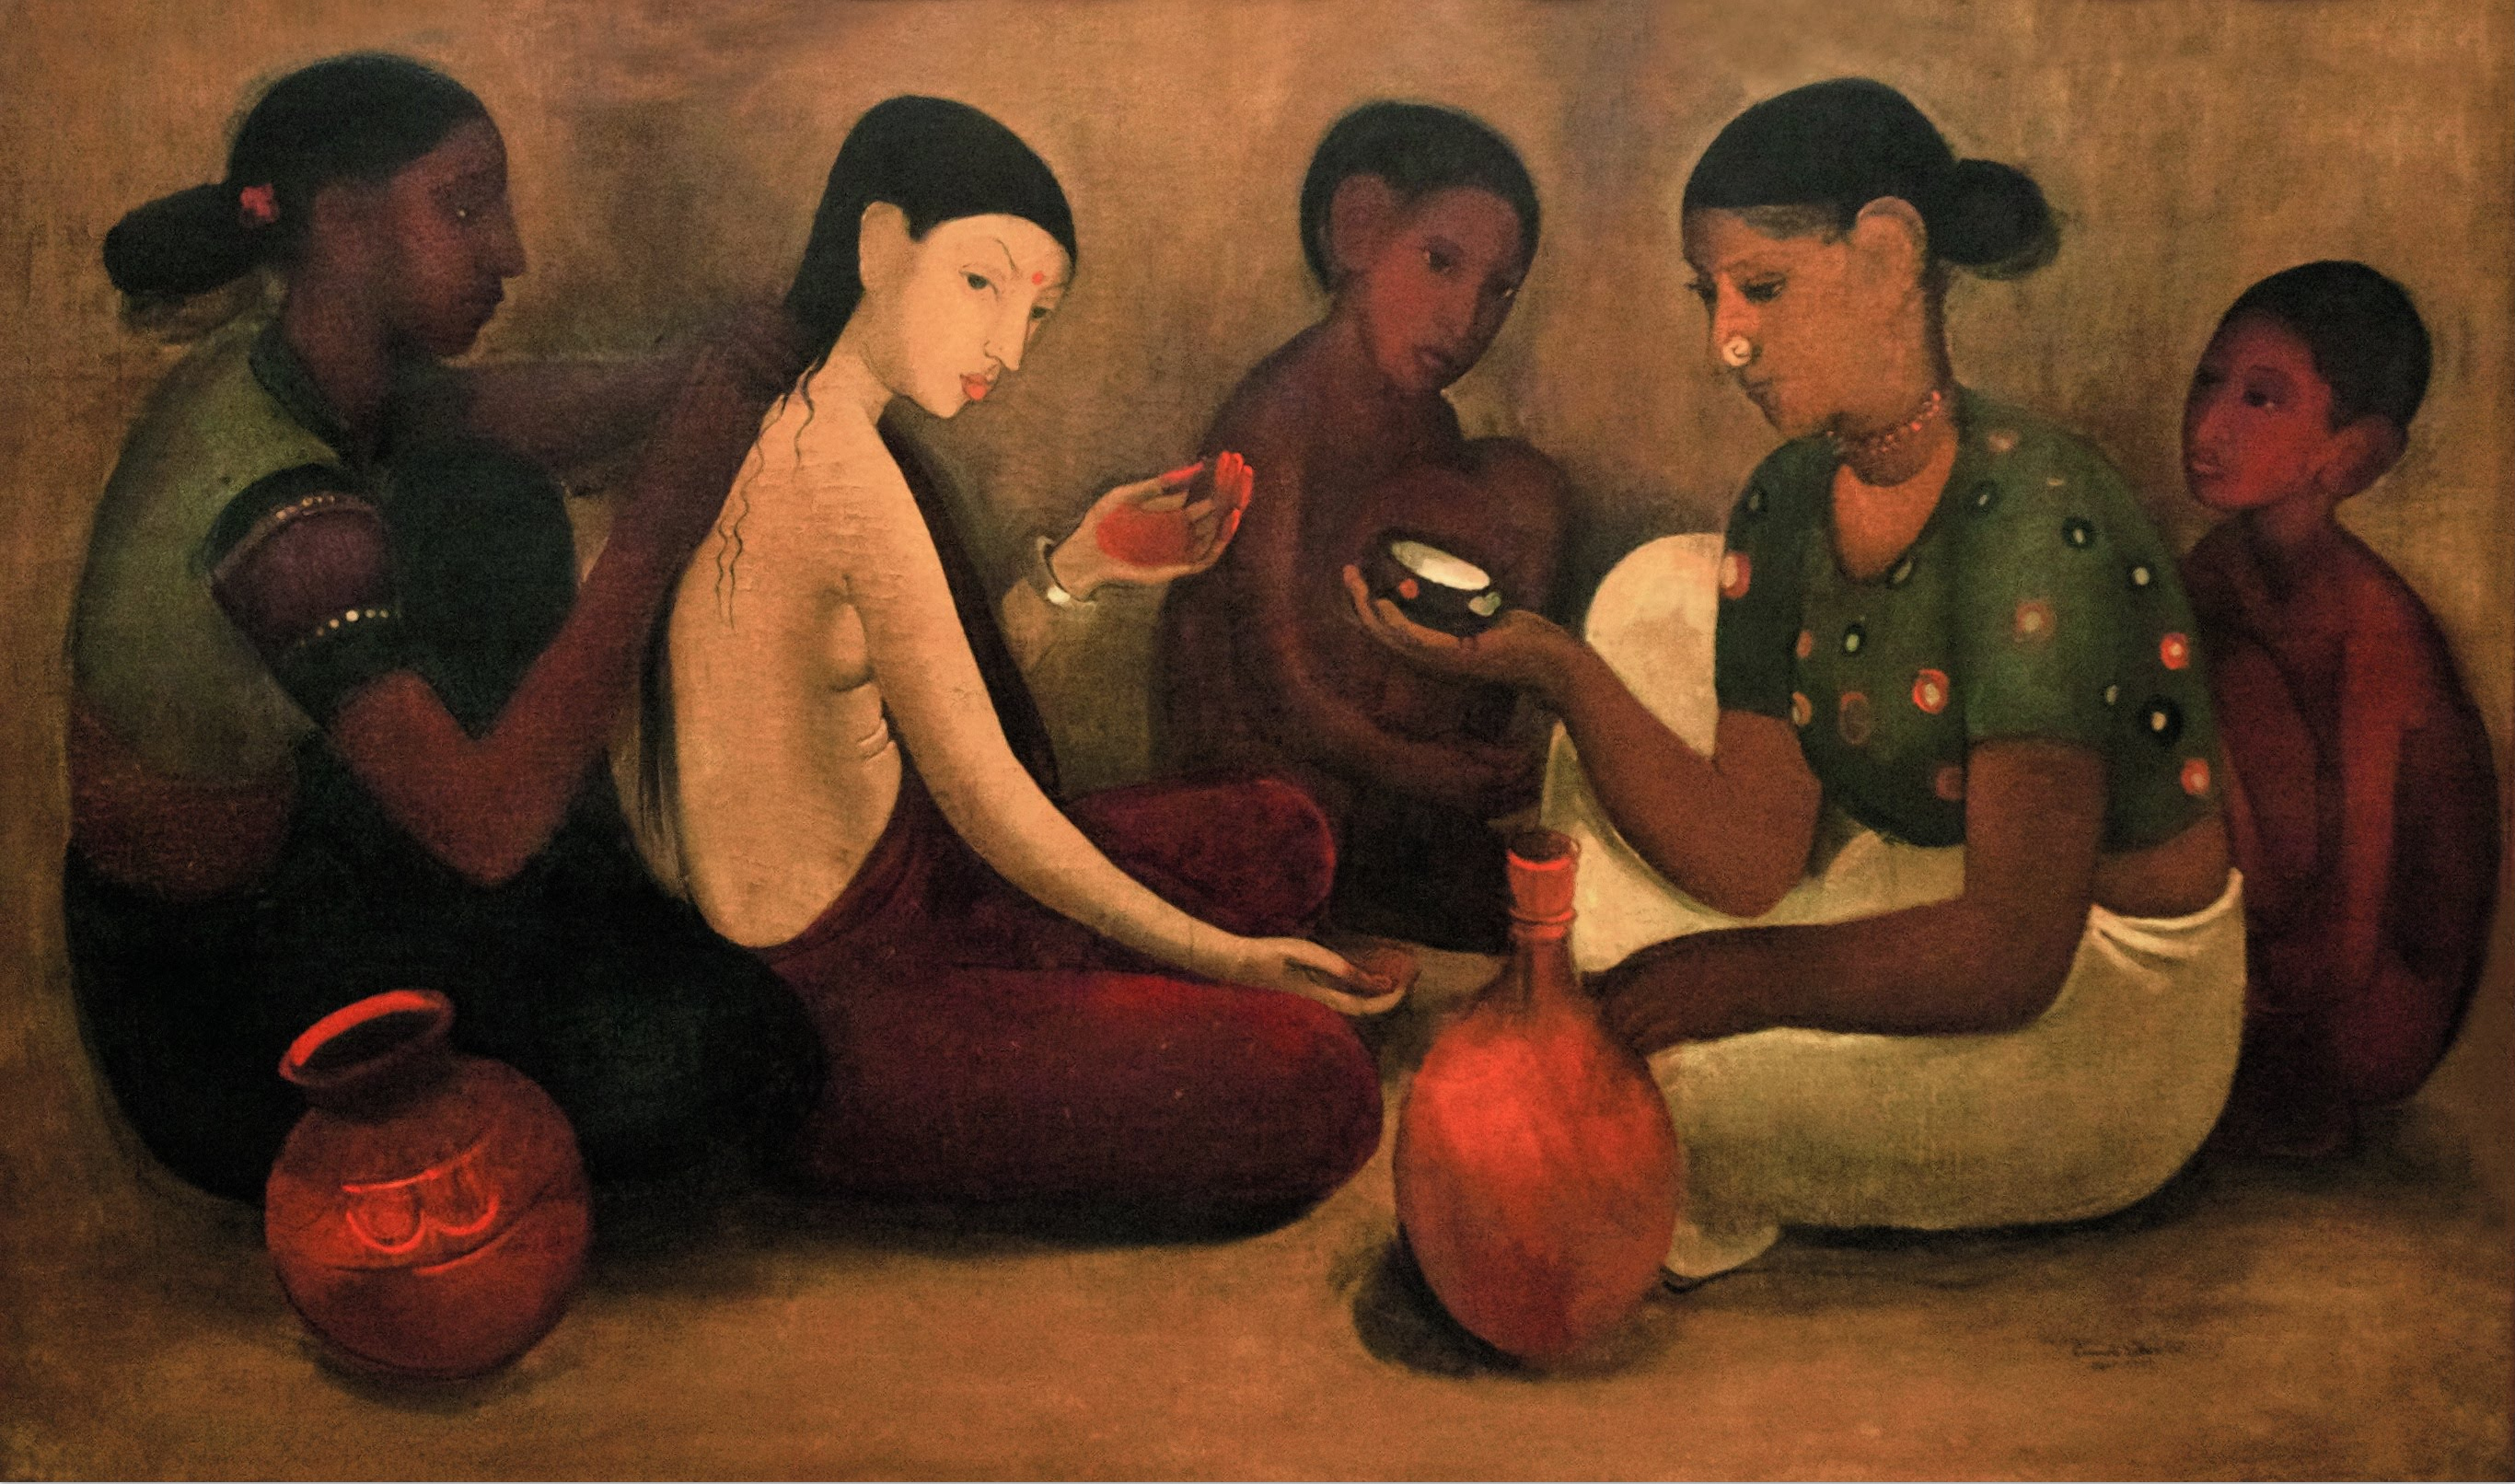 Bride's Toilet by Amrita Sher-Gil - 1937 - 144,5 x 86 cm National Gallery of Modern Art